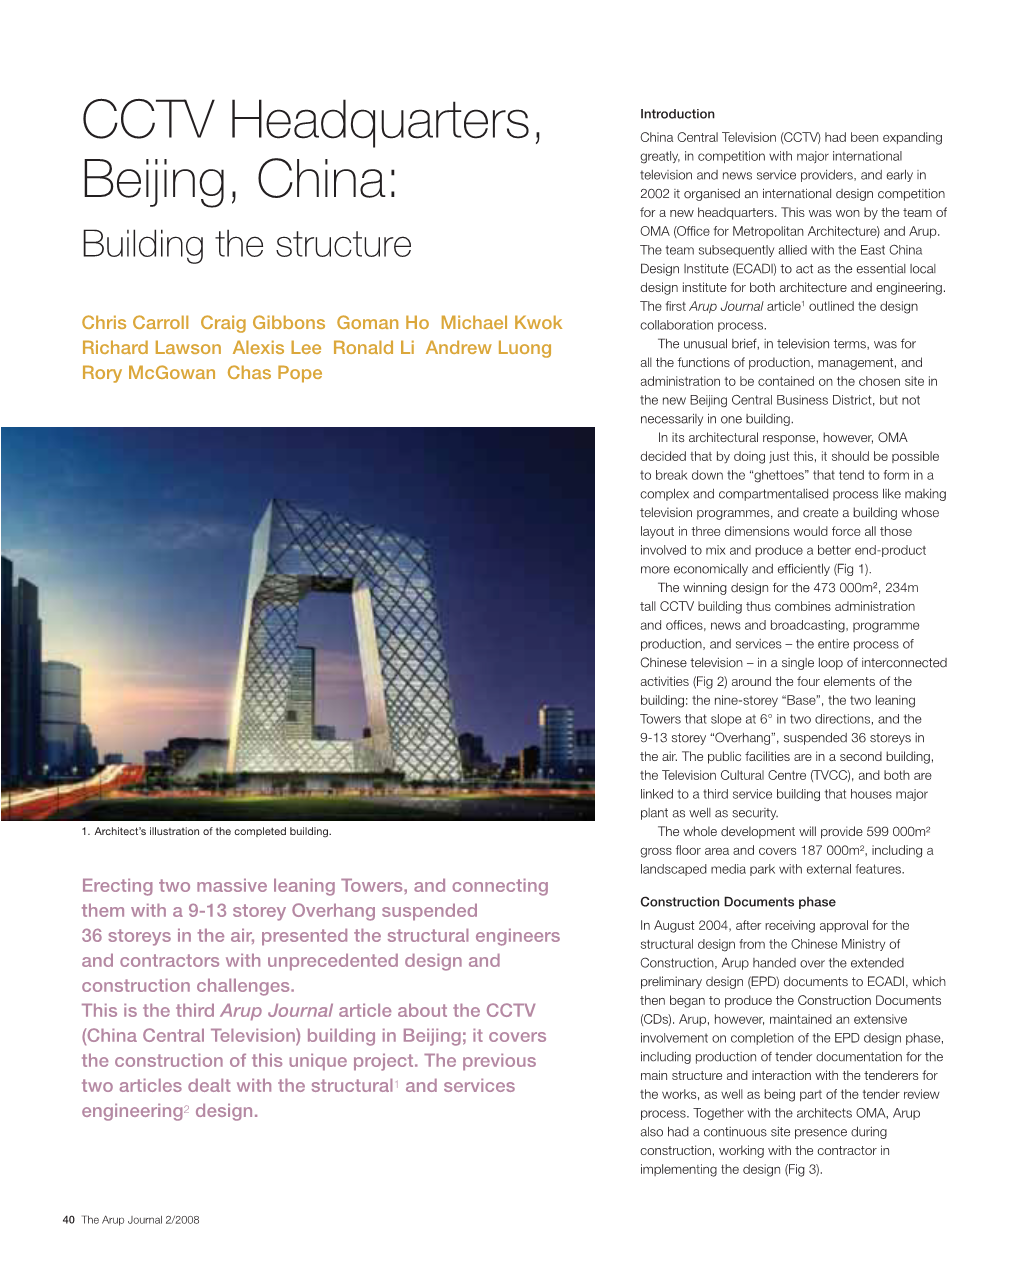 CCTV Headquarters, Beijing, China: Thought About the Buildability of the Primary Structural Elements and Connections